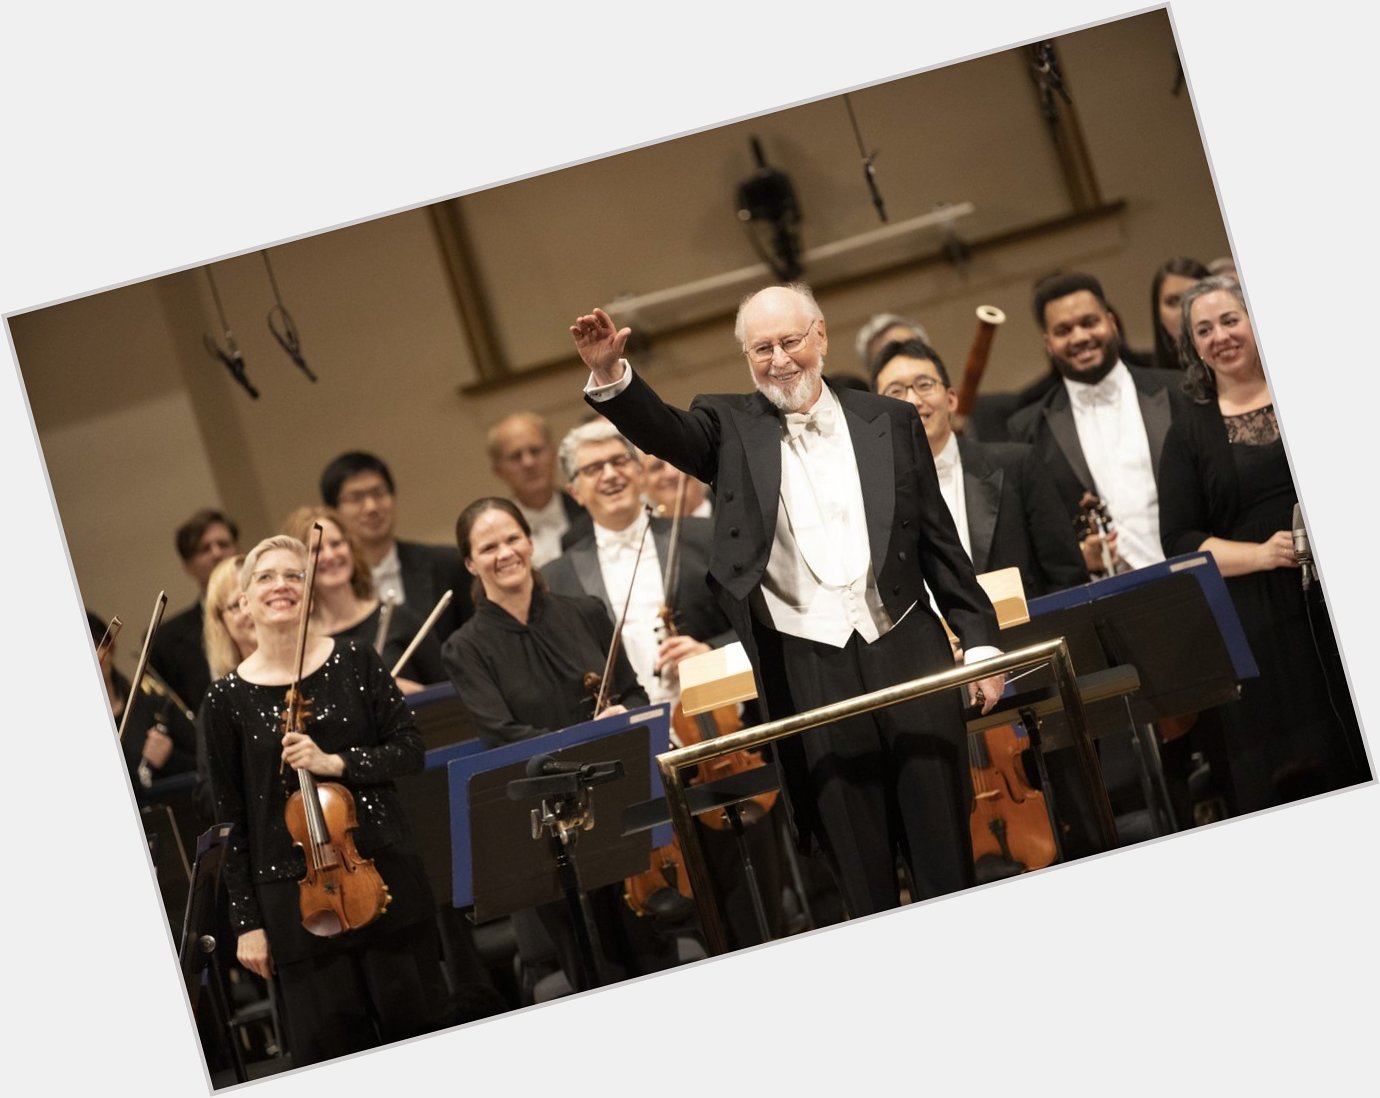 Happy Birthday John Williams! Thank you for being a part of our season, a gift we\ll never forget. 